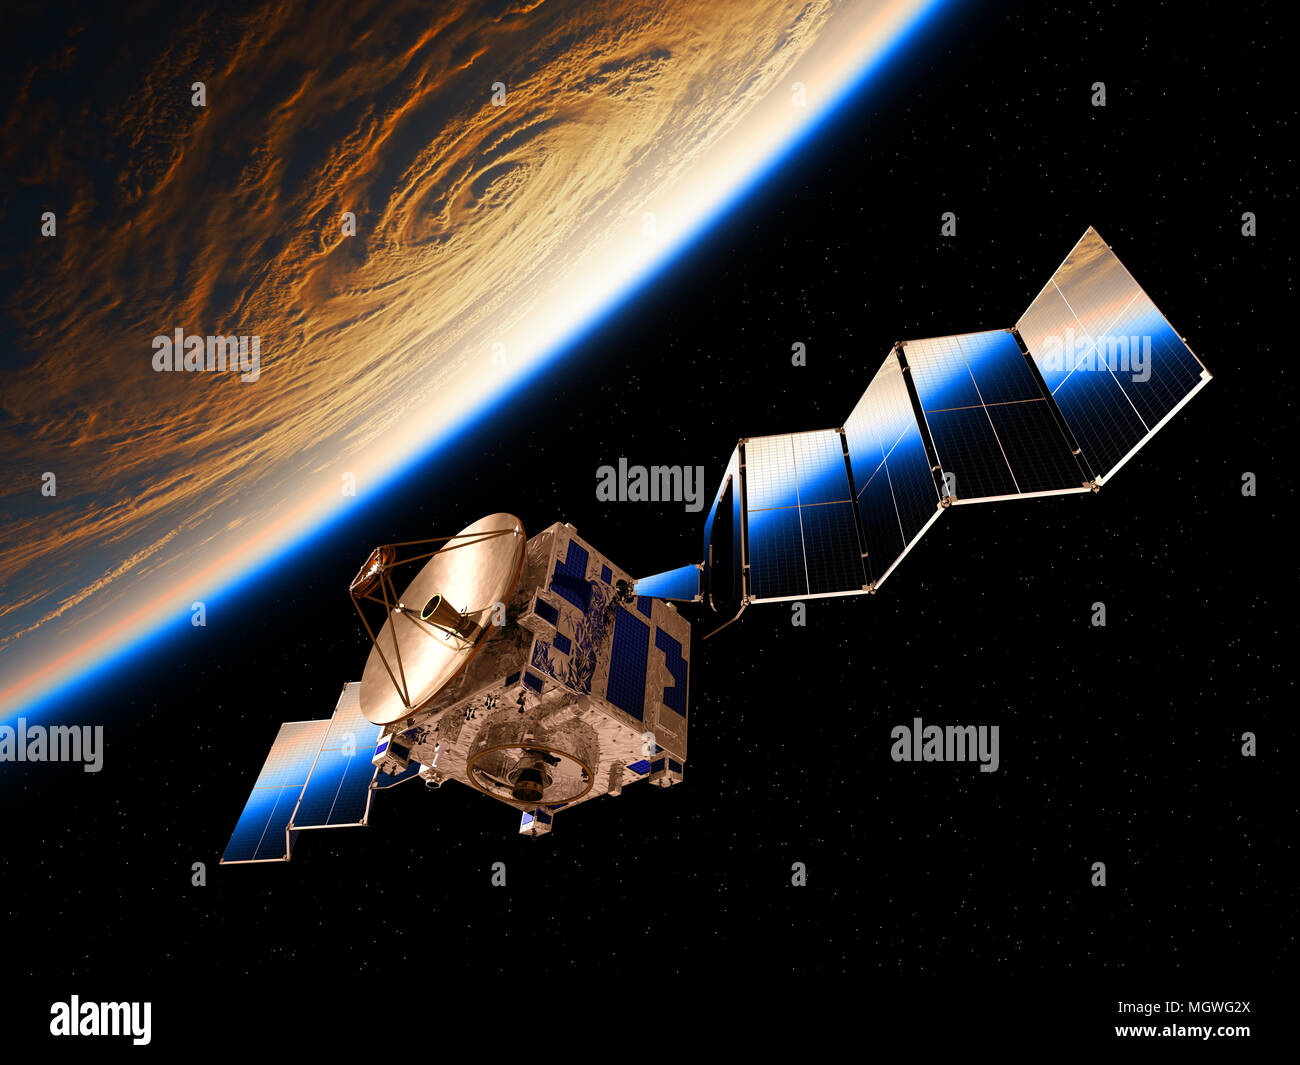 Reflection Of Earth In Deployed Solar Panels Of A Space Satellite. 3D Illustration. Stock Photo